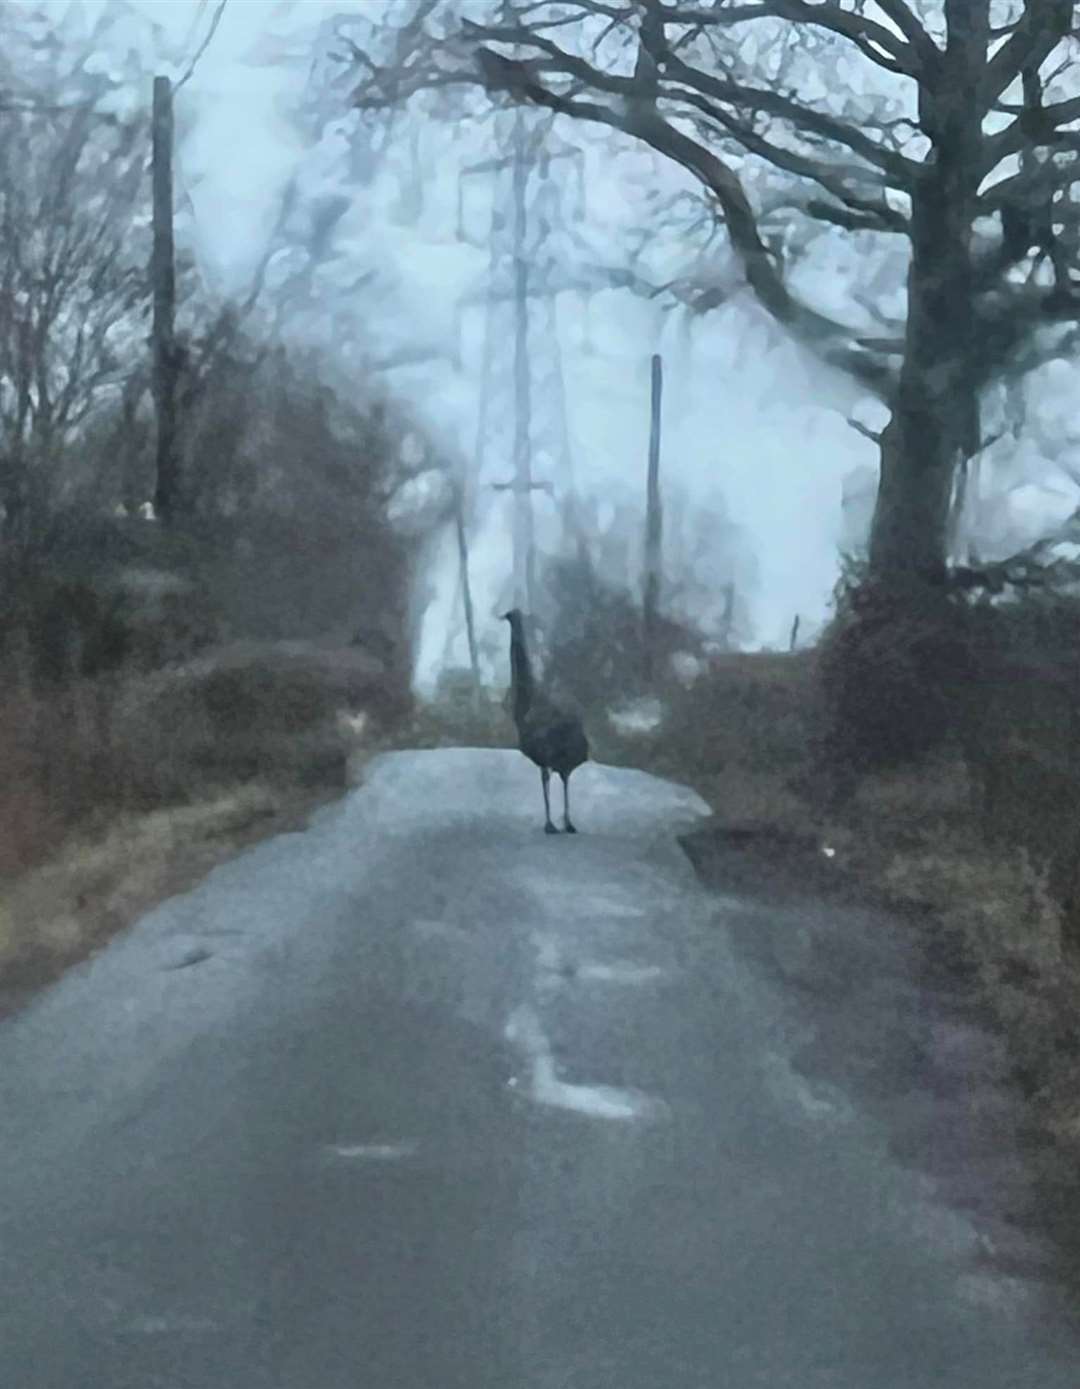 The emu was in the middle of the road